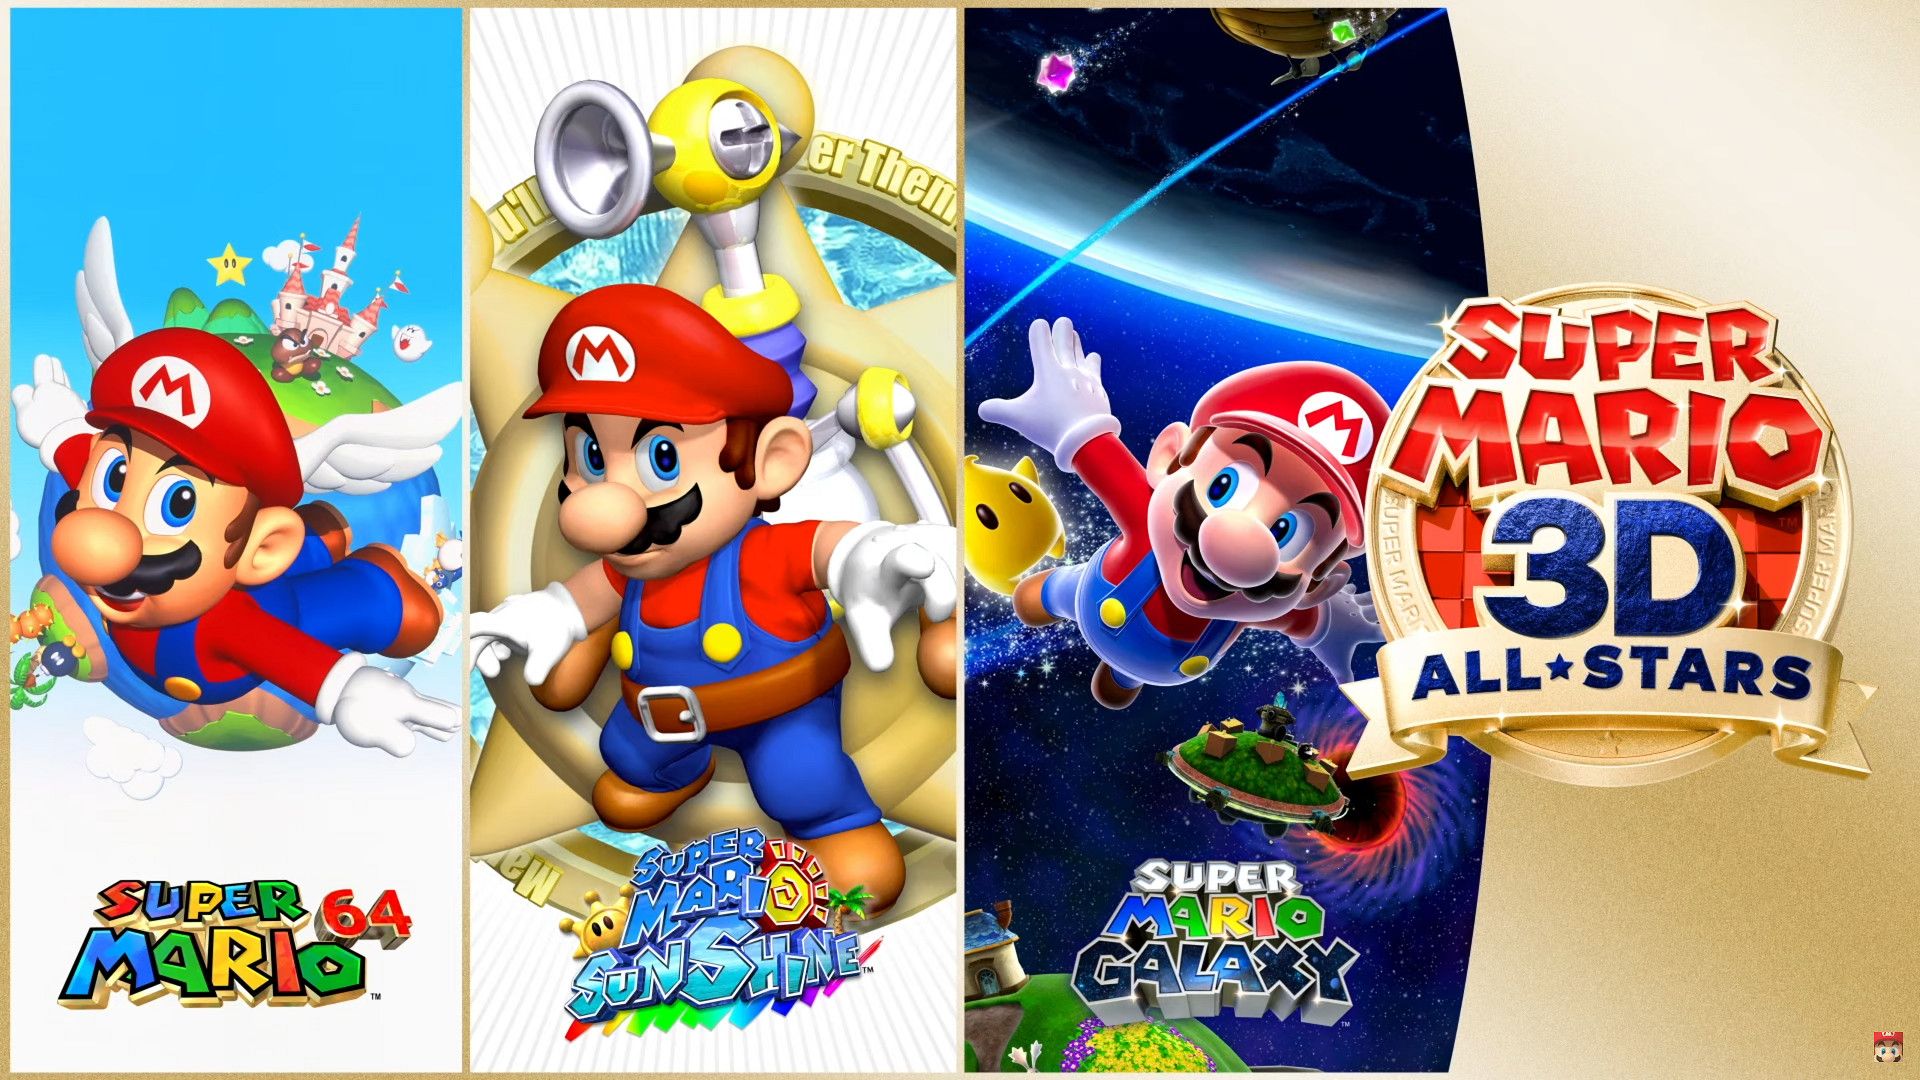 Super Mario 3D All Stars Brings Super Mario Sunshine, And Galaxy To The Switch